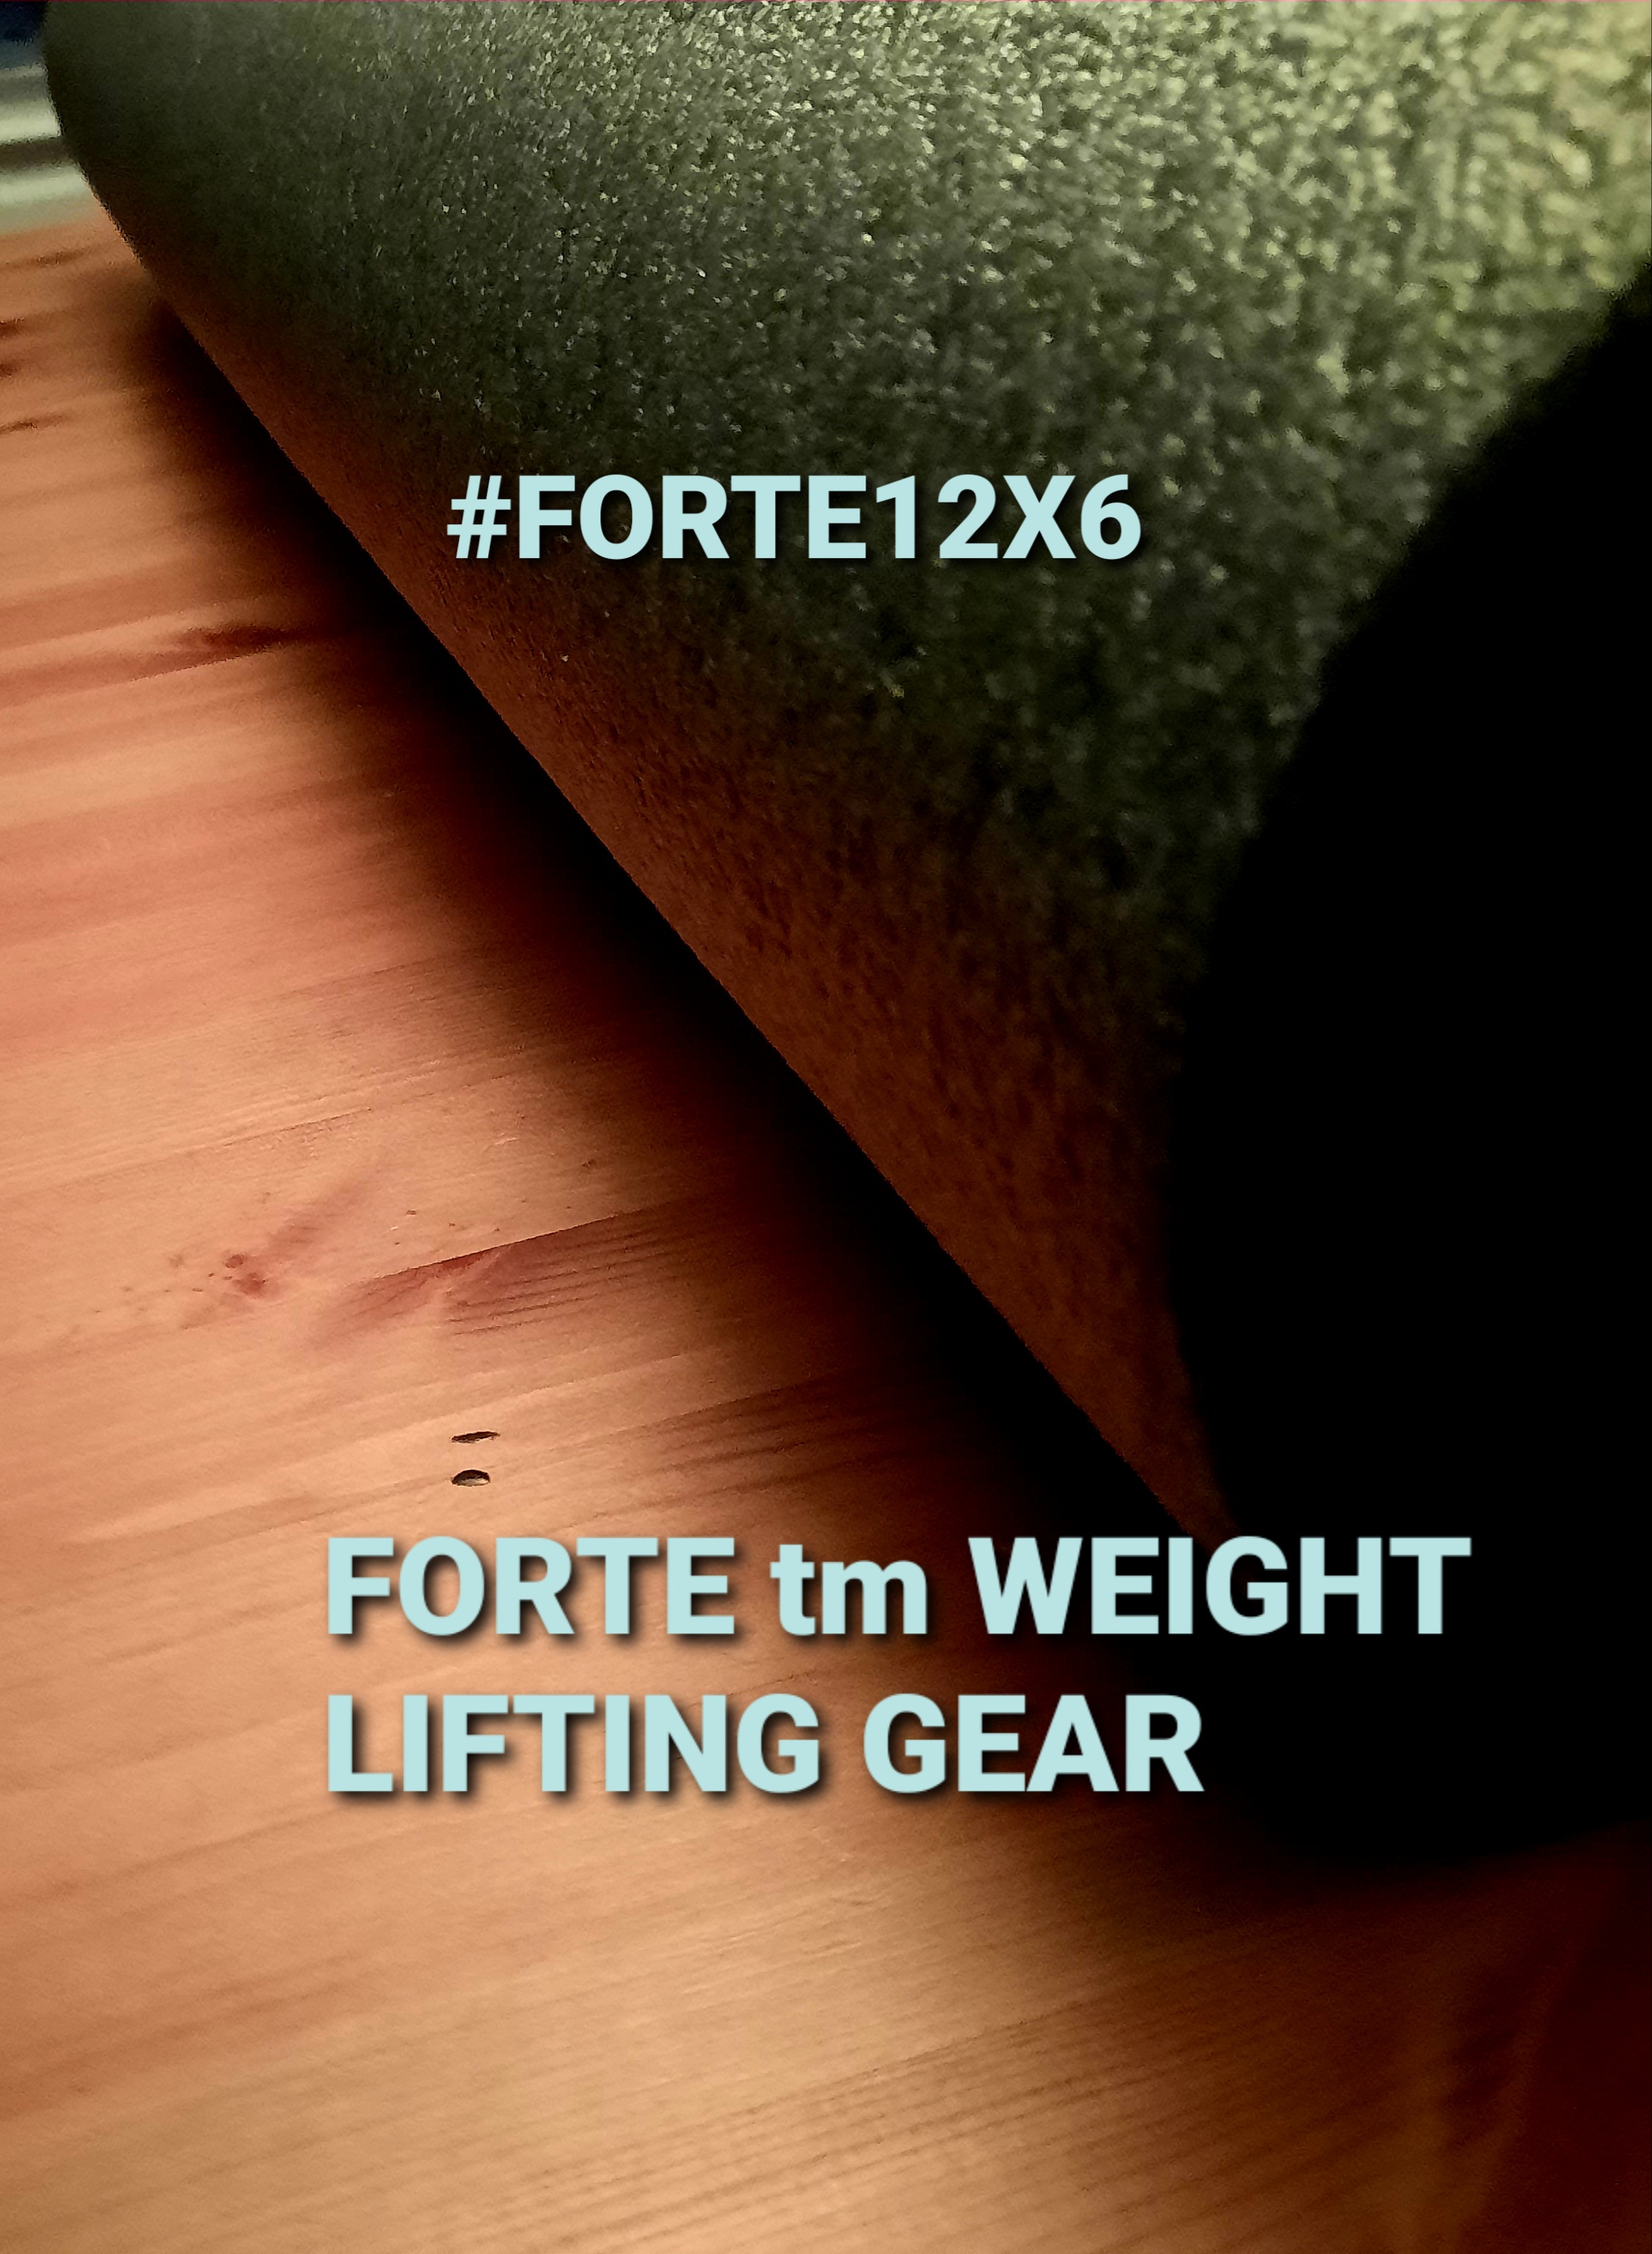 FORTE tm WEIGHT LIFTING GEAR LEG EXERCISE ROLLERS #FORTE12X6